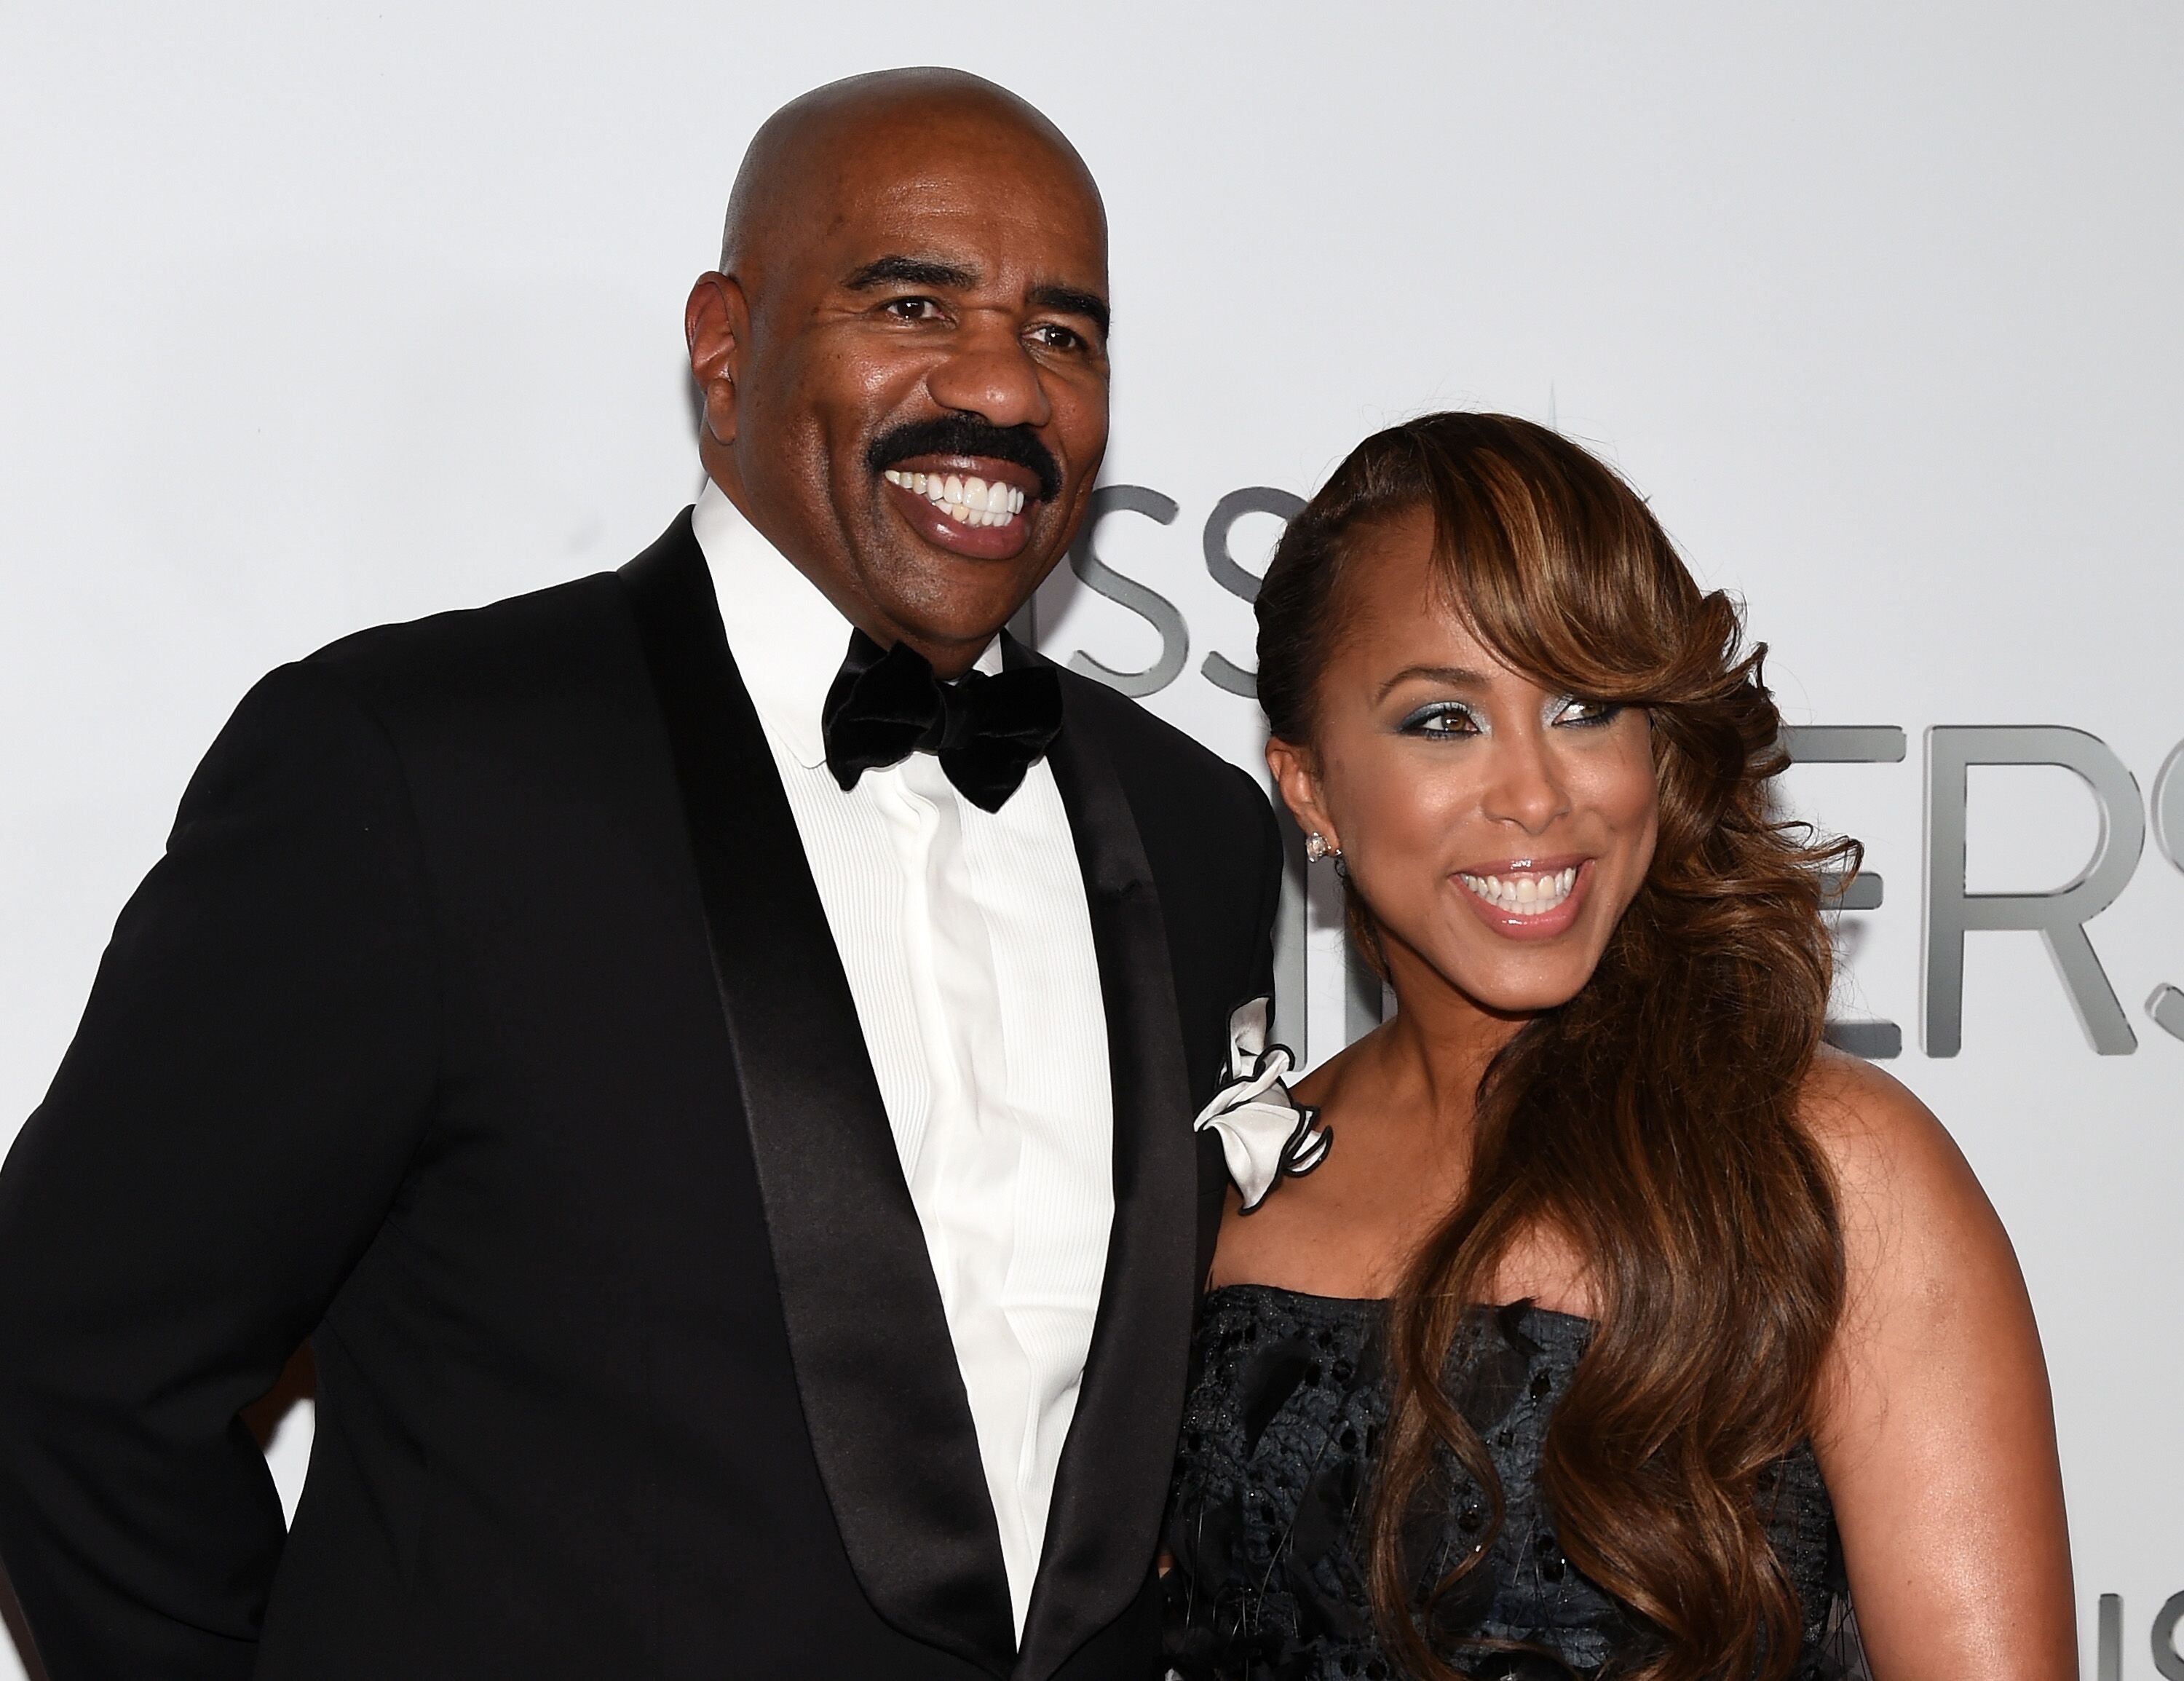 Steve Harvey and his wife Marjorie Harvey attend the 2015 Miss Universe Pageant at Planet Hollywood Resort & Casino on December 20, 2015 in Las Vegas, Nevada | Source: Getty Images/GlobalImagesUkraine